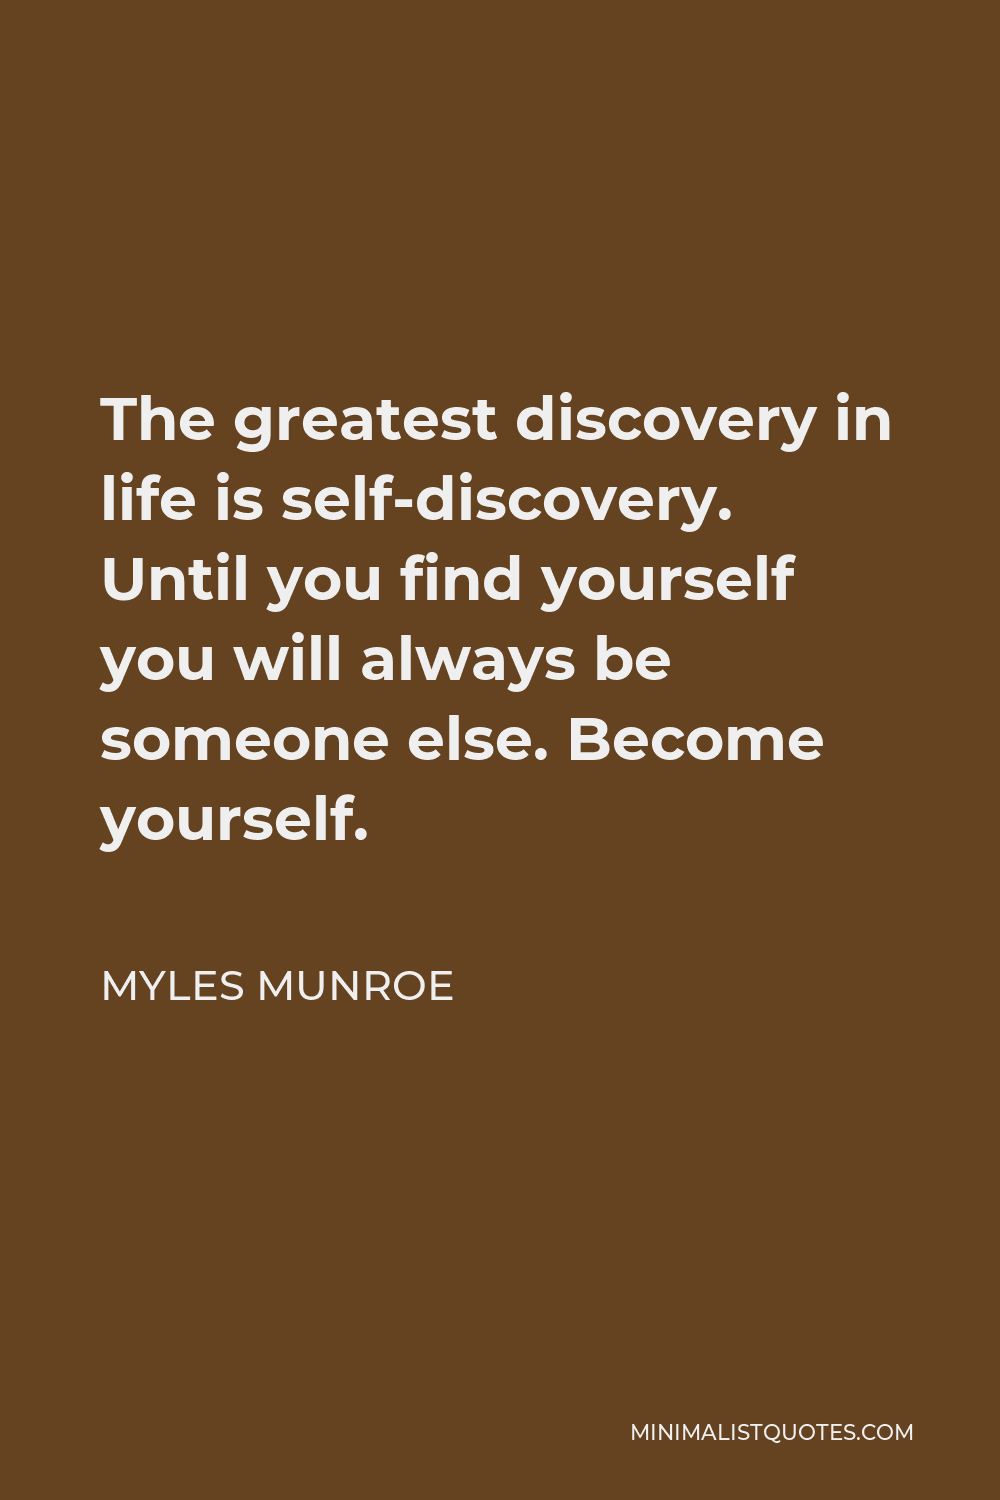 Myles Munroe Quote - The greatest discovery in life is self-discovery. Until you find yourself you will always be someone else. Become yourself.